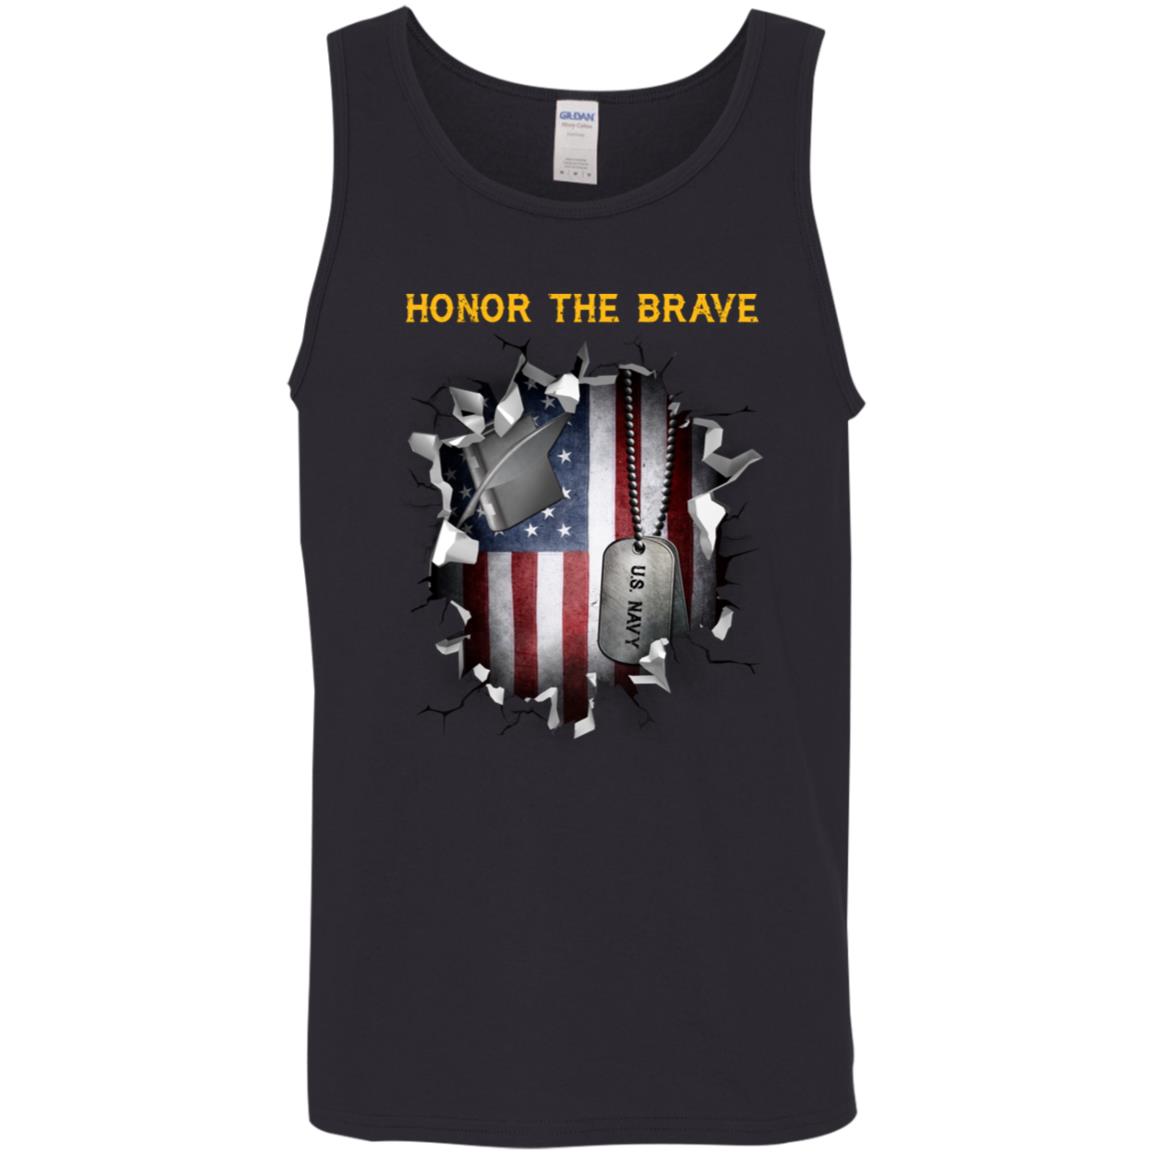 Navy Personnel Specialist Navy PS - Honor The Brave Front Shirt